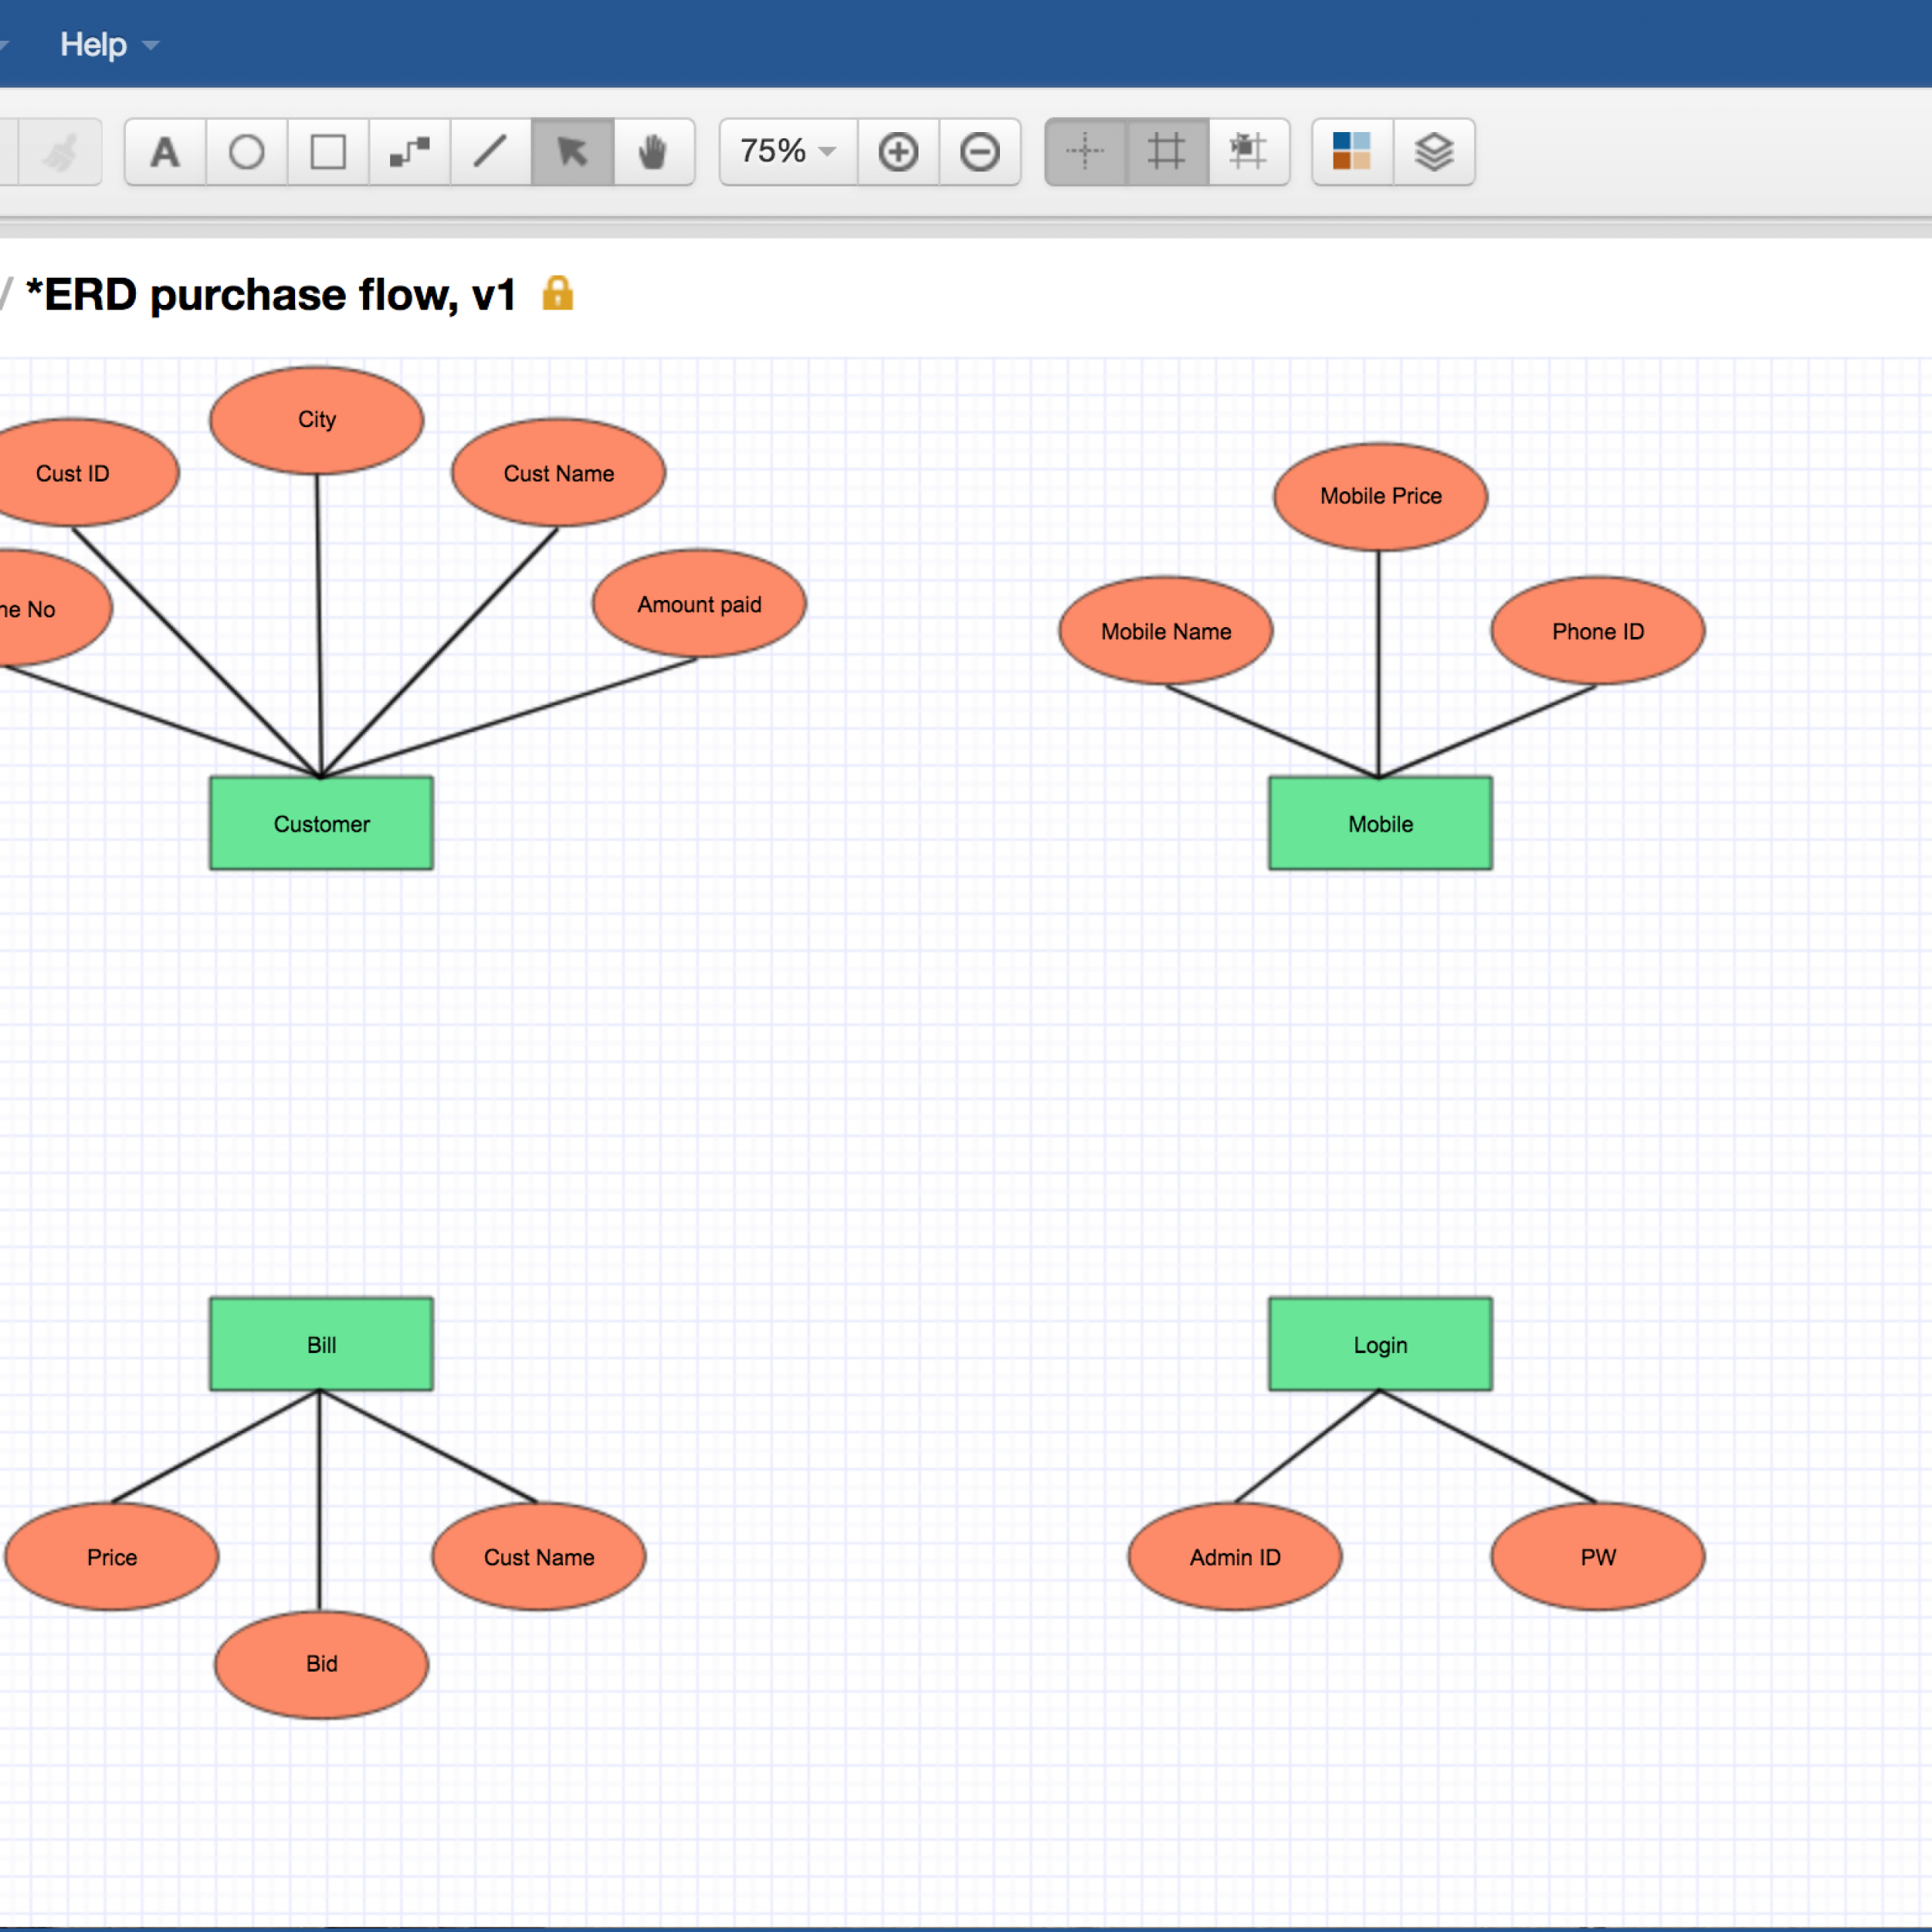 How To Draw An Entity-Relationship Diagram for Database One To Many Symbol